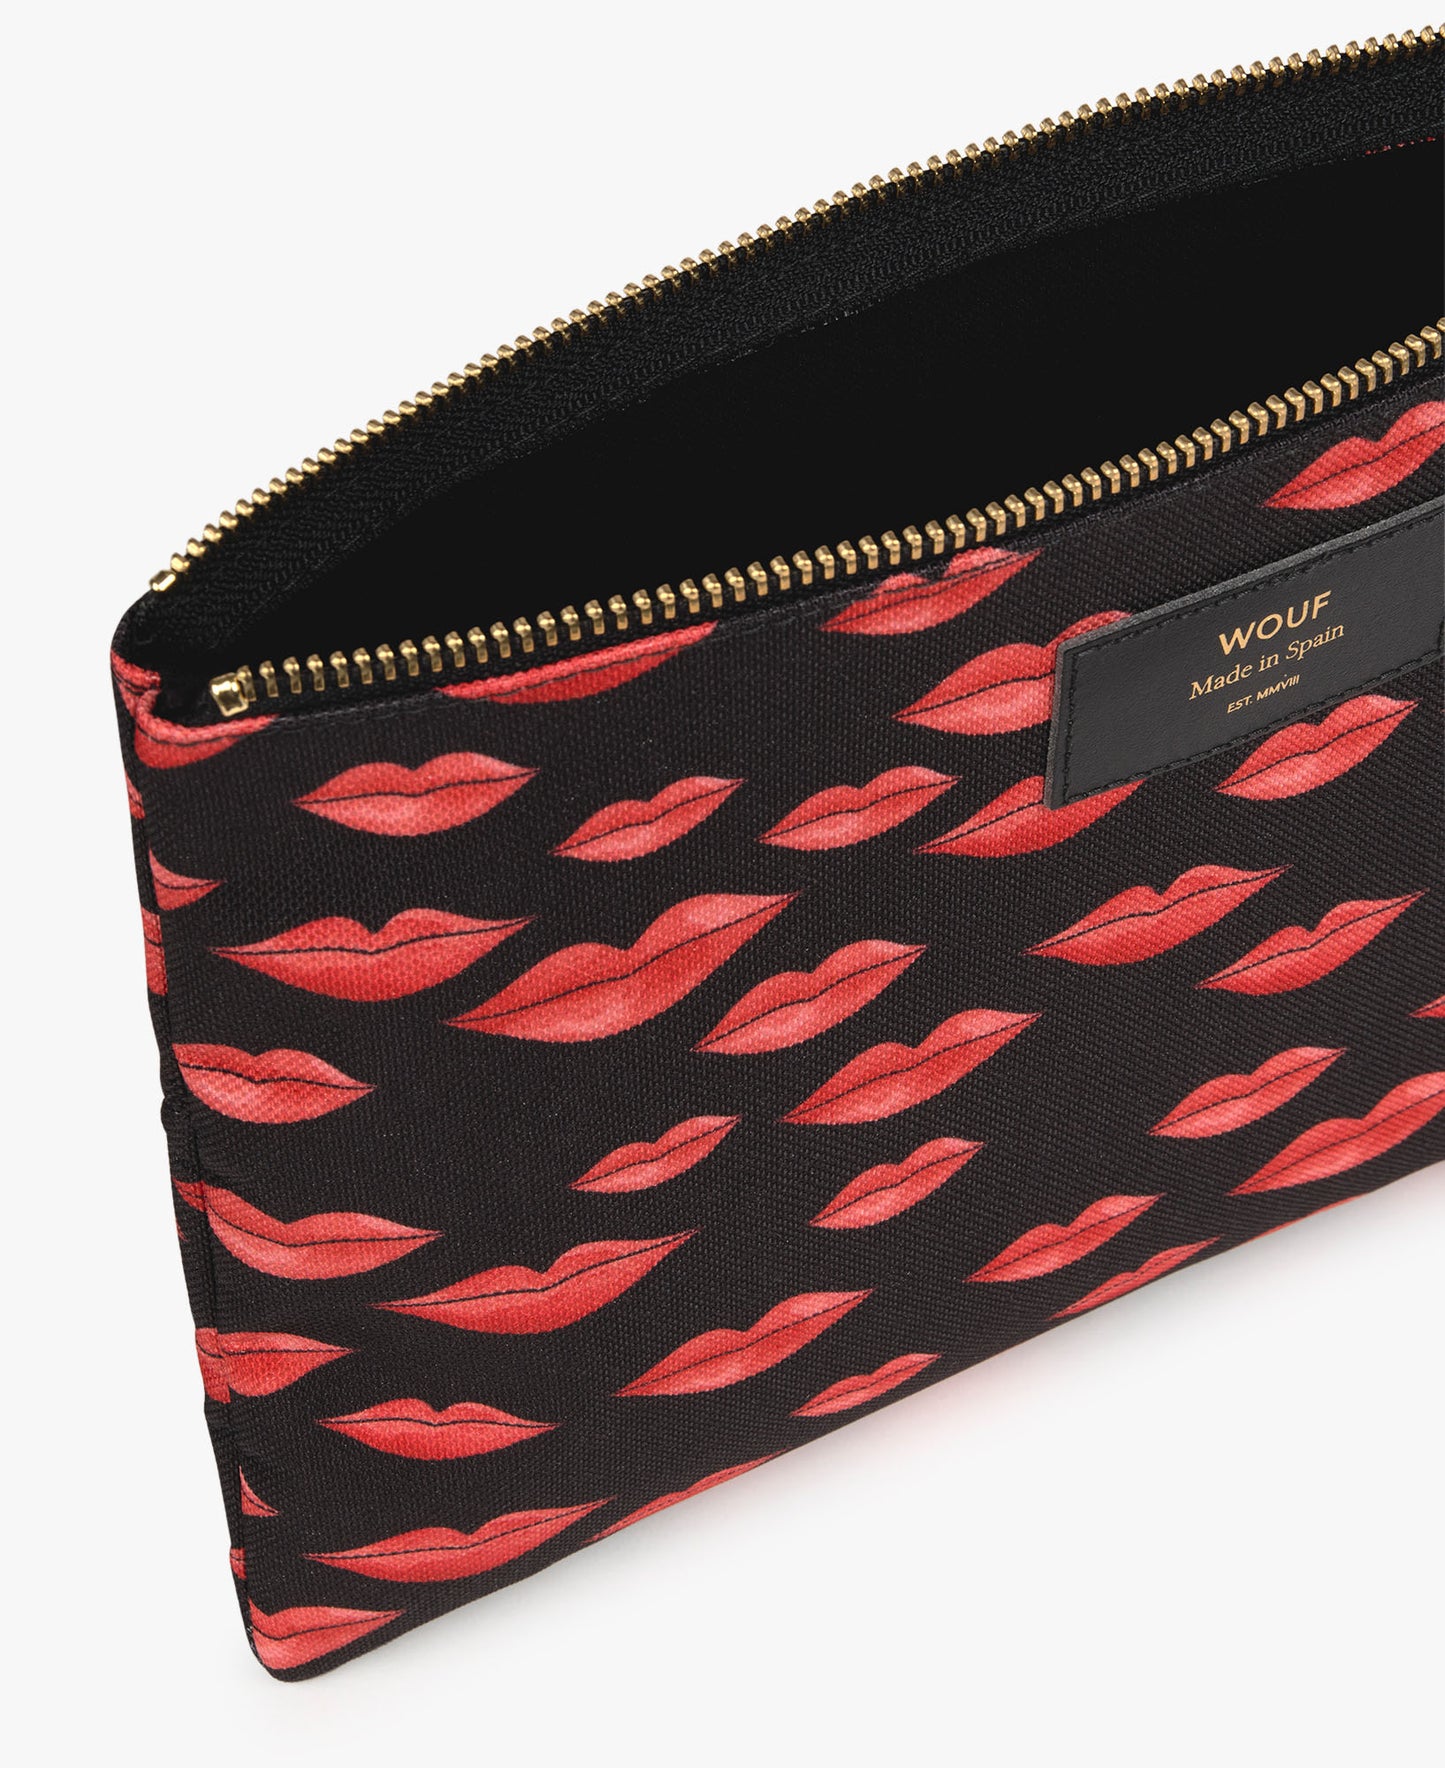 Beso XL Pouch Bag